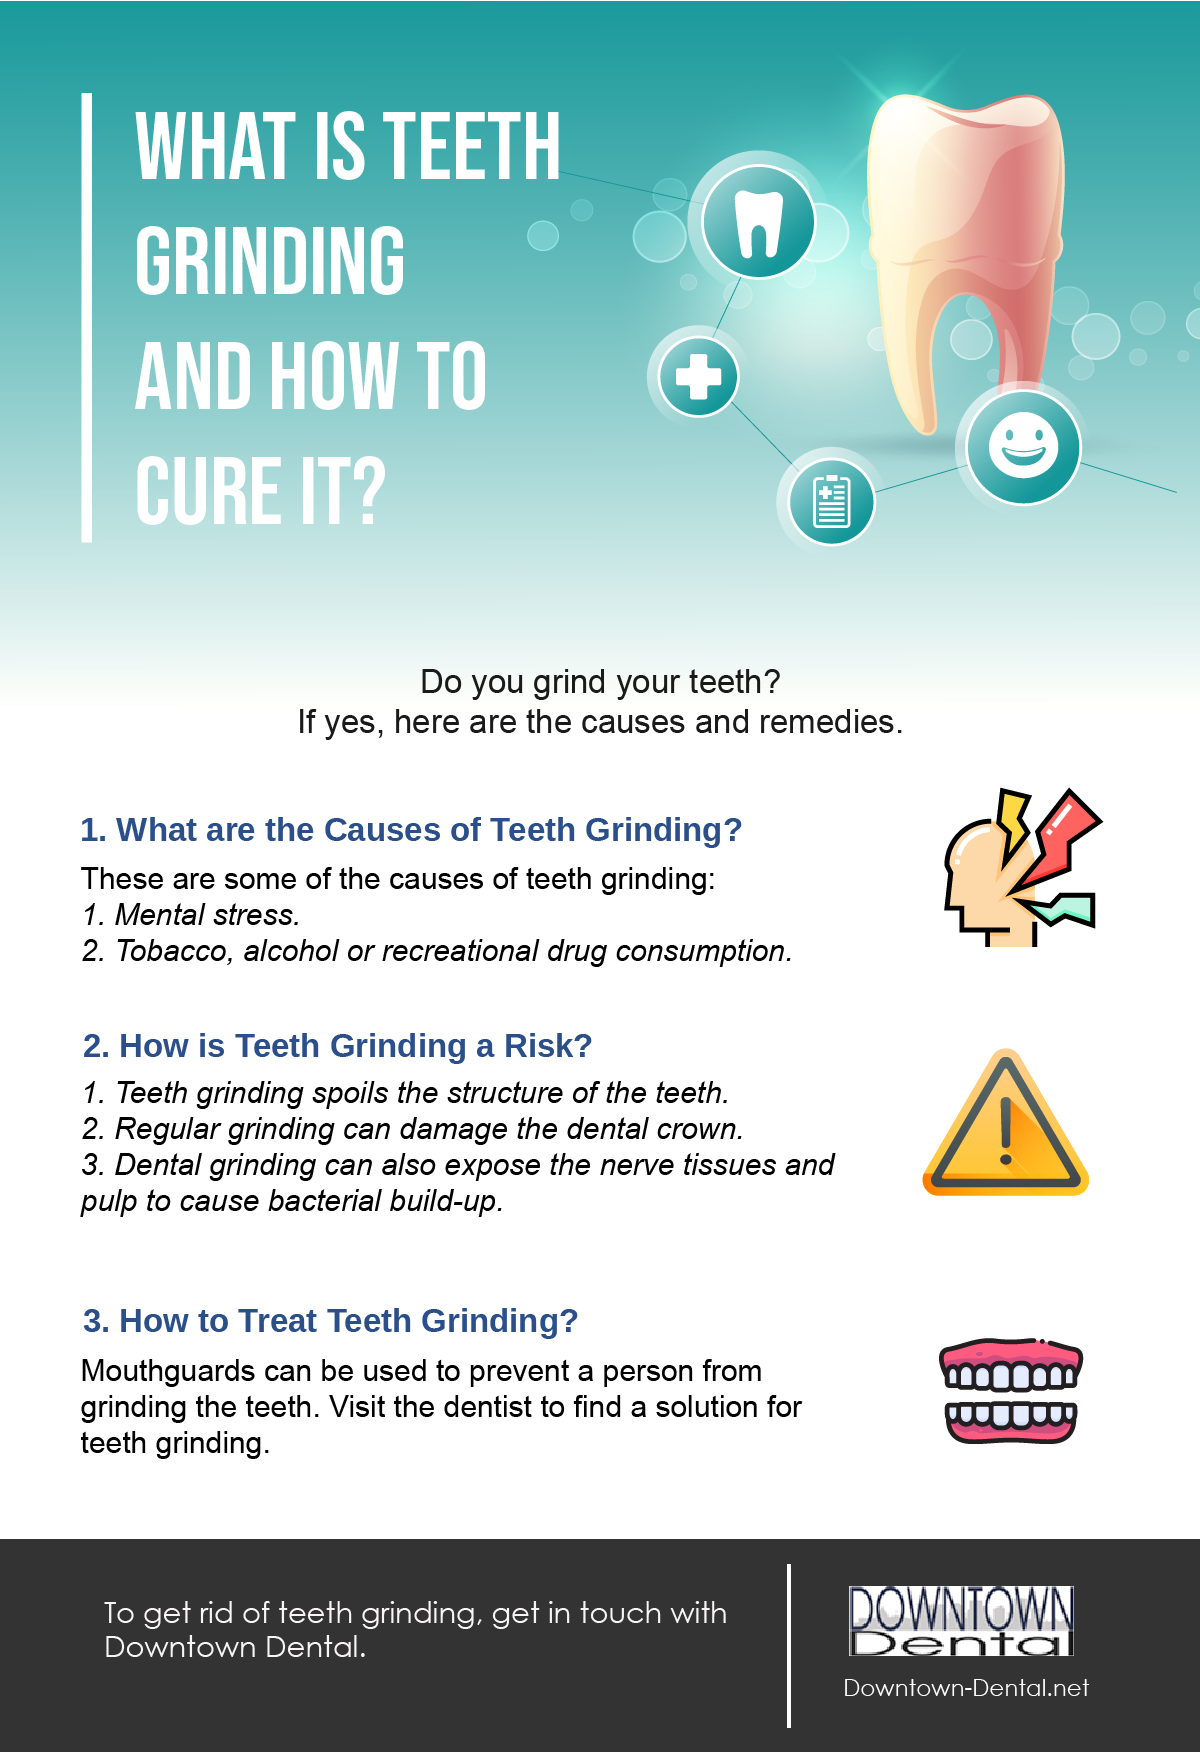 Teeth Grinding and How To Cure It